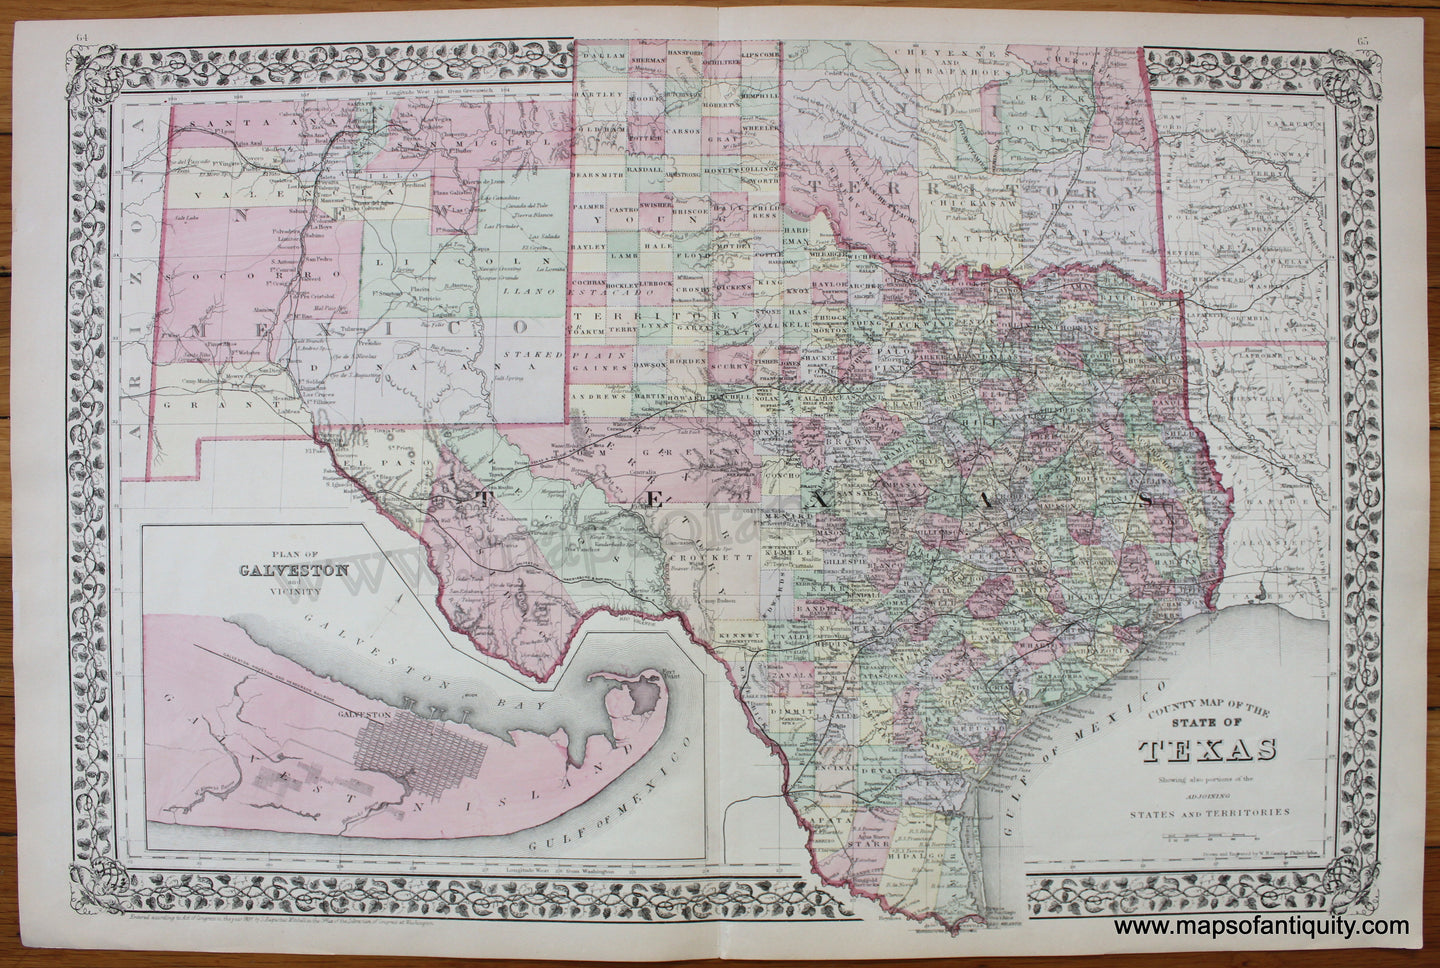 Antique-Hand-Colored-Map-County-Map-of-the-State-of-Texas-United-States-South-1884-Mitchell-Maps-Of-Antiquity